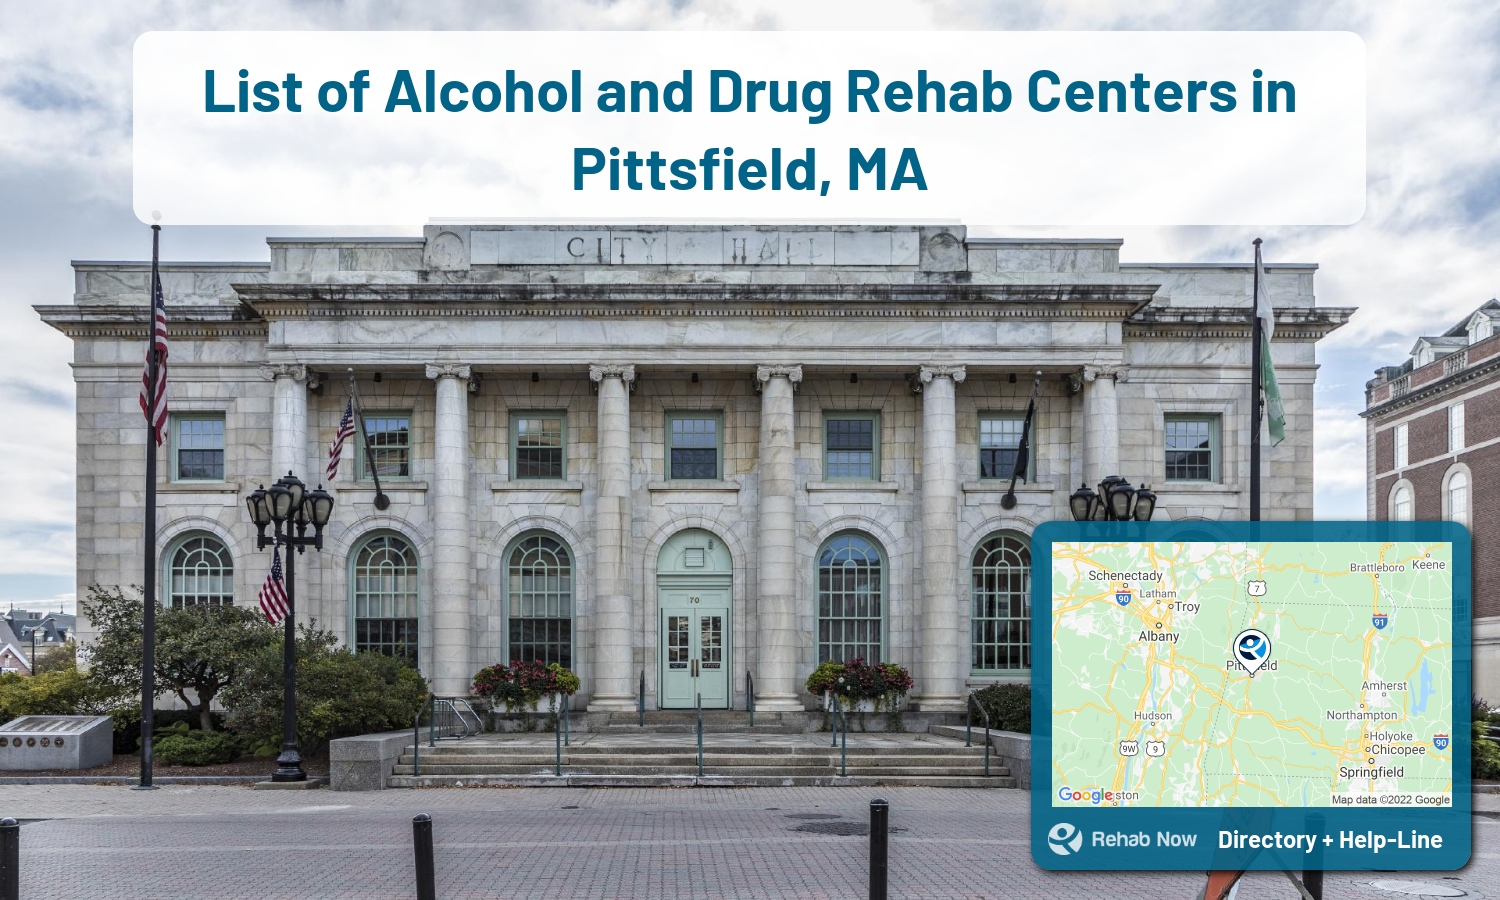 Pittsfield, MA Treatment Centers. Find drug rehab in Pittsfield, Massachusetts, or detox and treatment programs. Get the right help now!